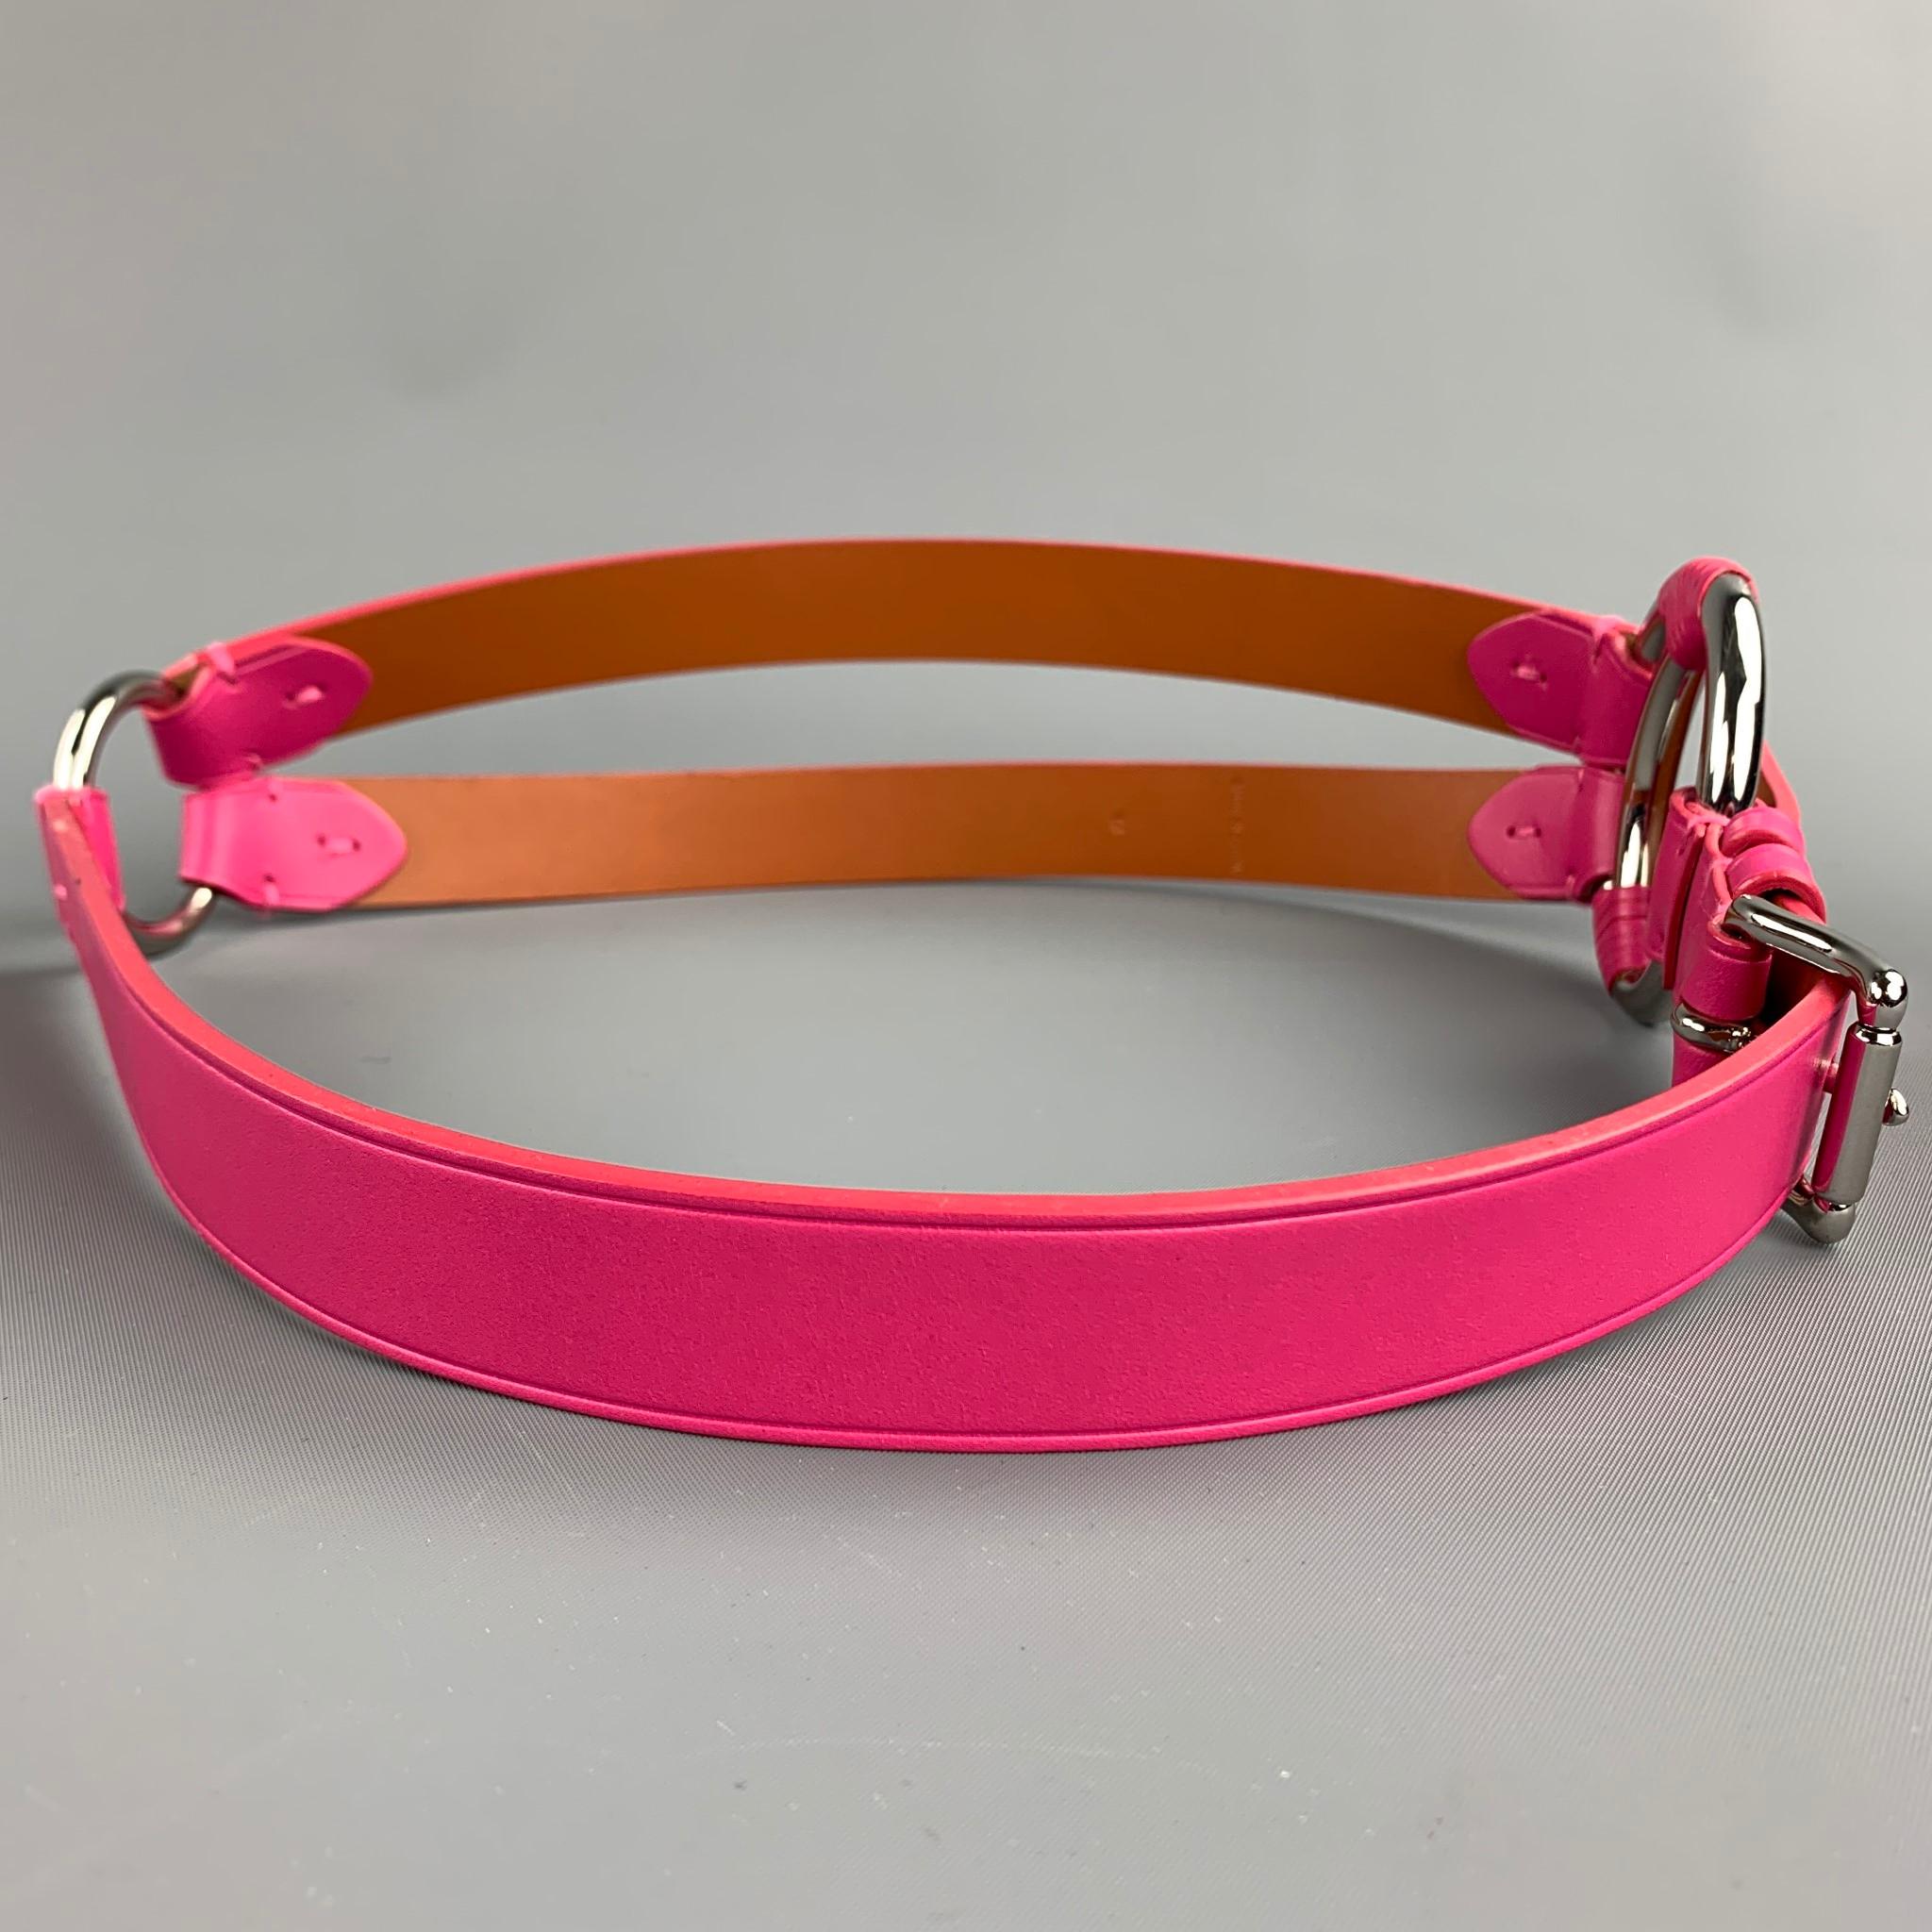 RALPH LAUREN belt comes in a pink leather with silver tone hardware and a buckle closure. 

Very Good Pre-Owned Condition.
Marked: M
Original Retail Price: $695.00

Length: 38 in.
Width: 1 in.
Fits: 32 in. - 34 in.